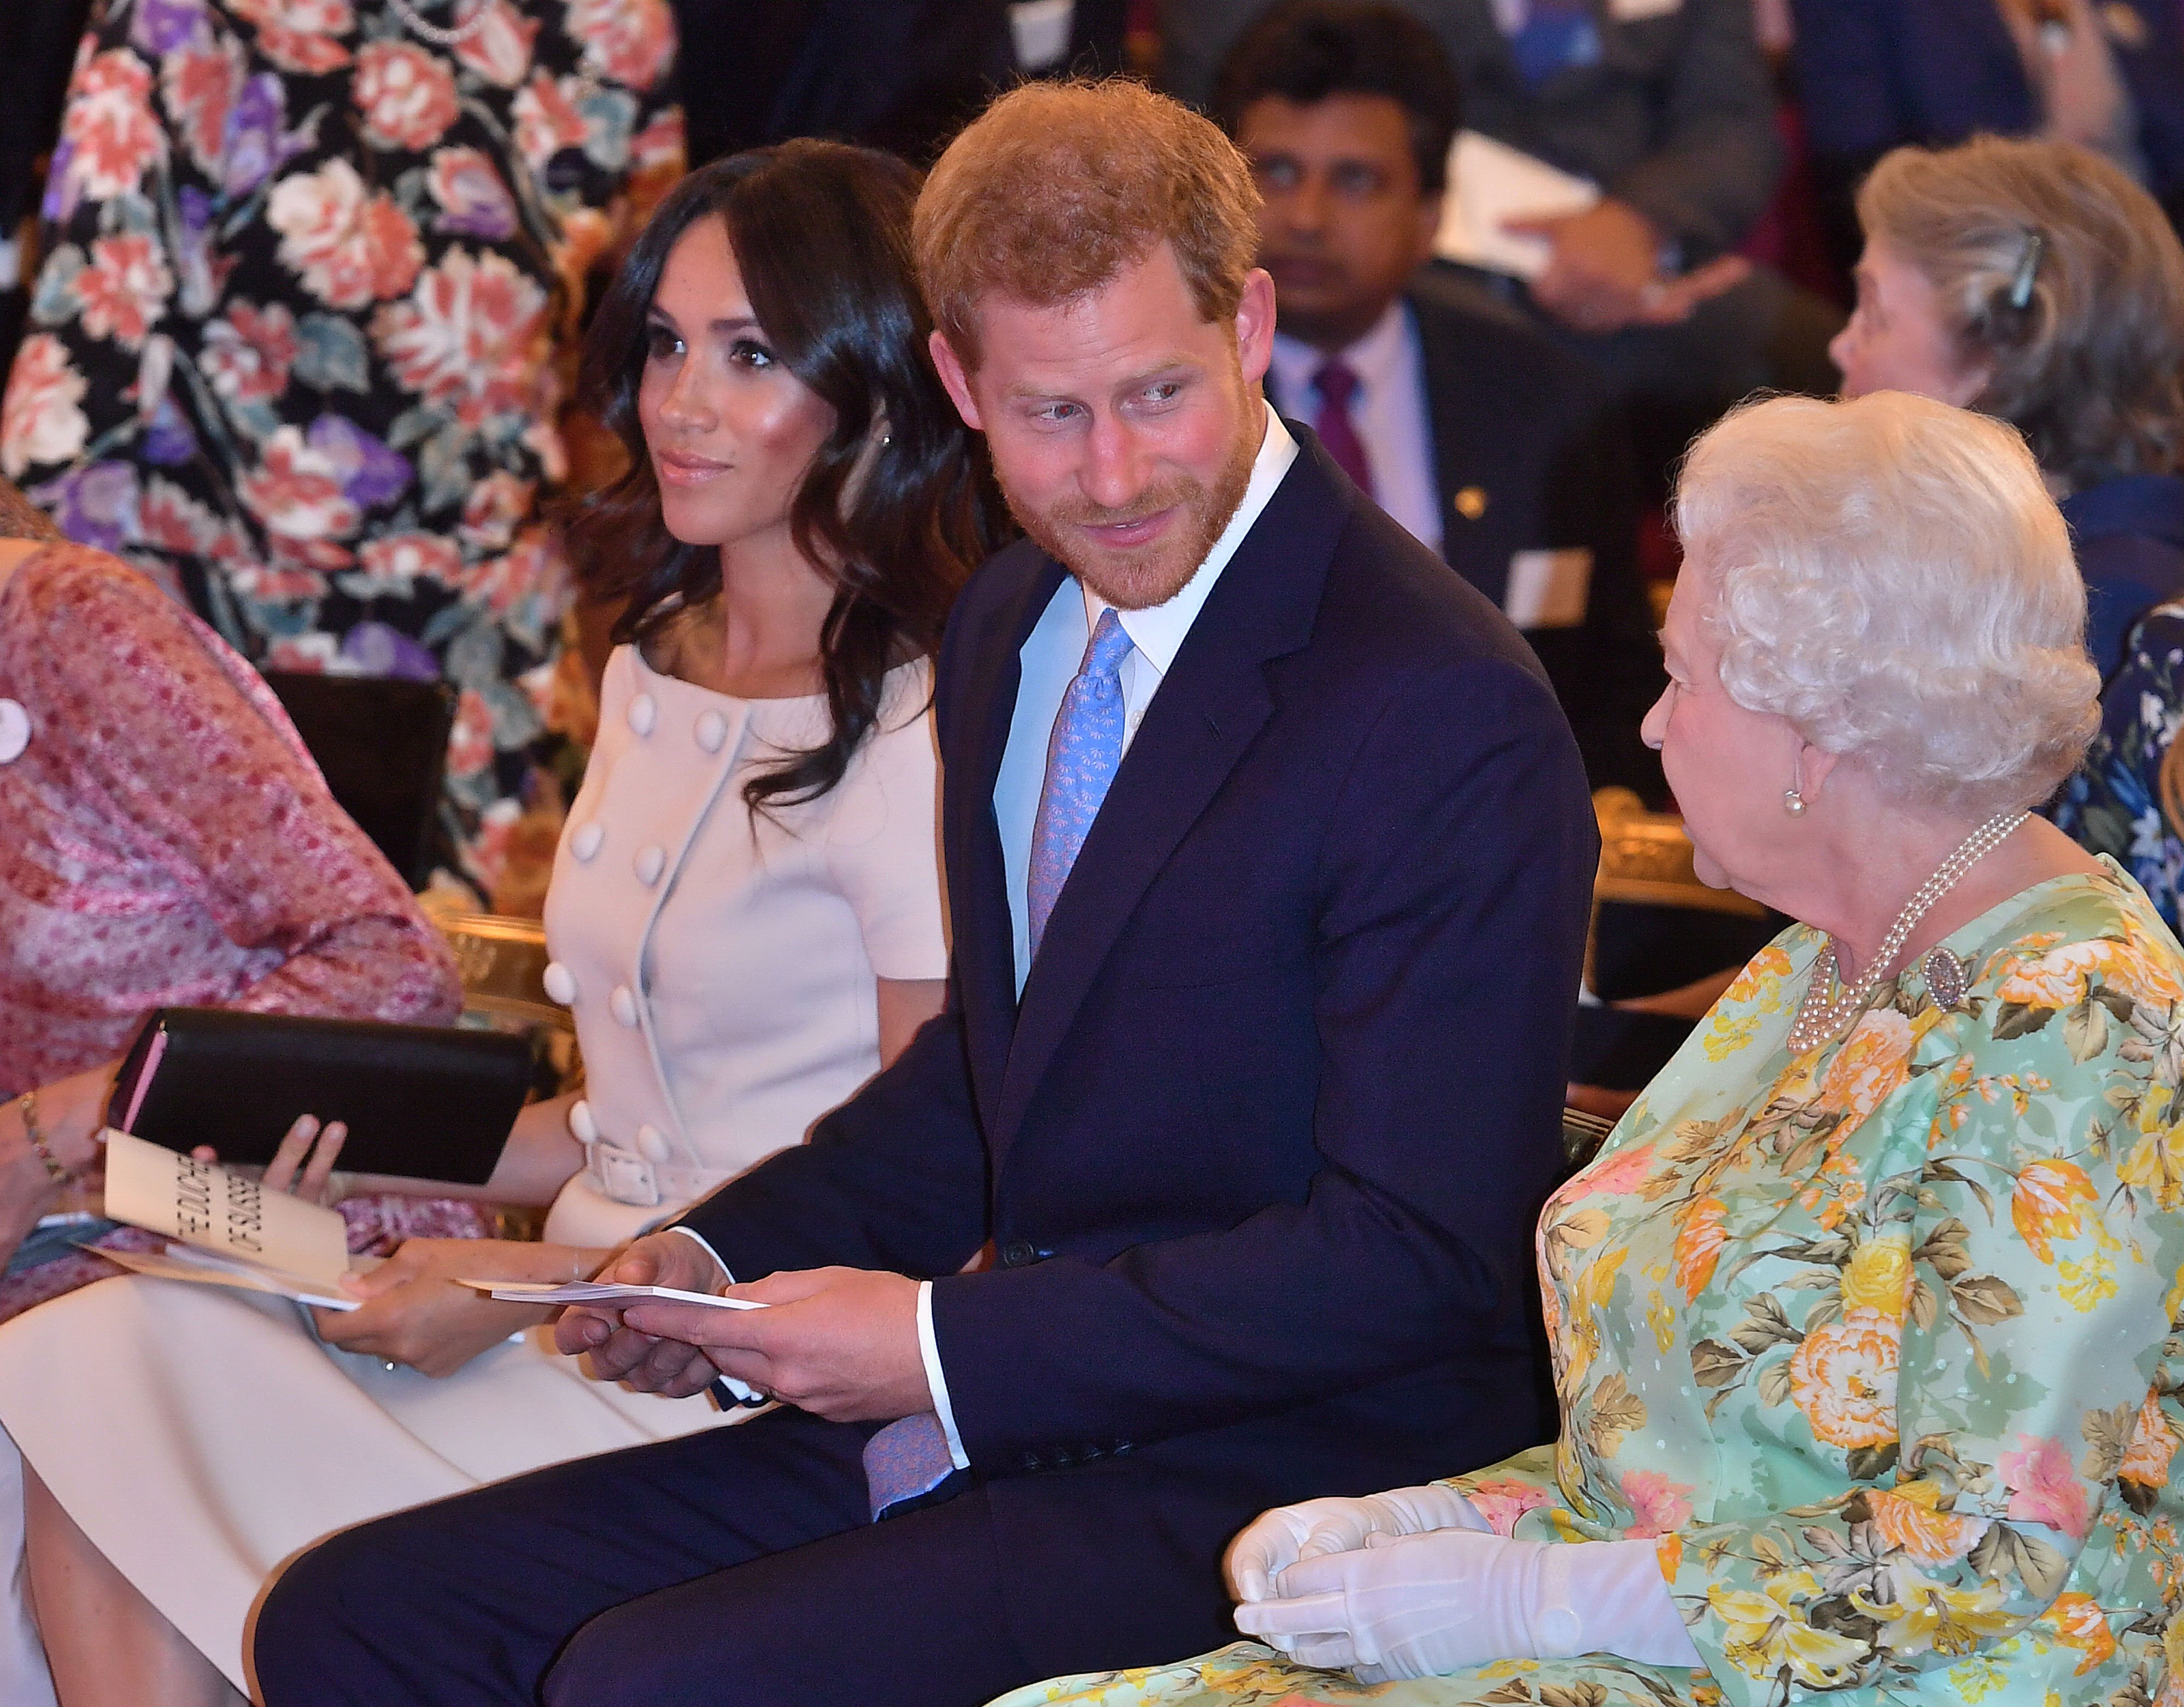 Duchess Meghan, Prince Harry, and Queen Elizabeth II at the Queen's Young Leaders Award Ceremony at Buckingham Palace on June 26, 2018, in London, England. | Source: Getty Images